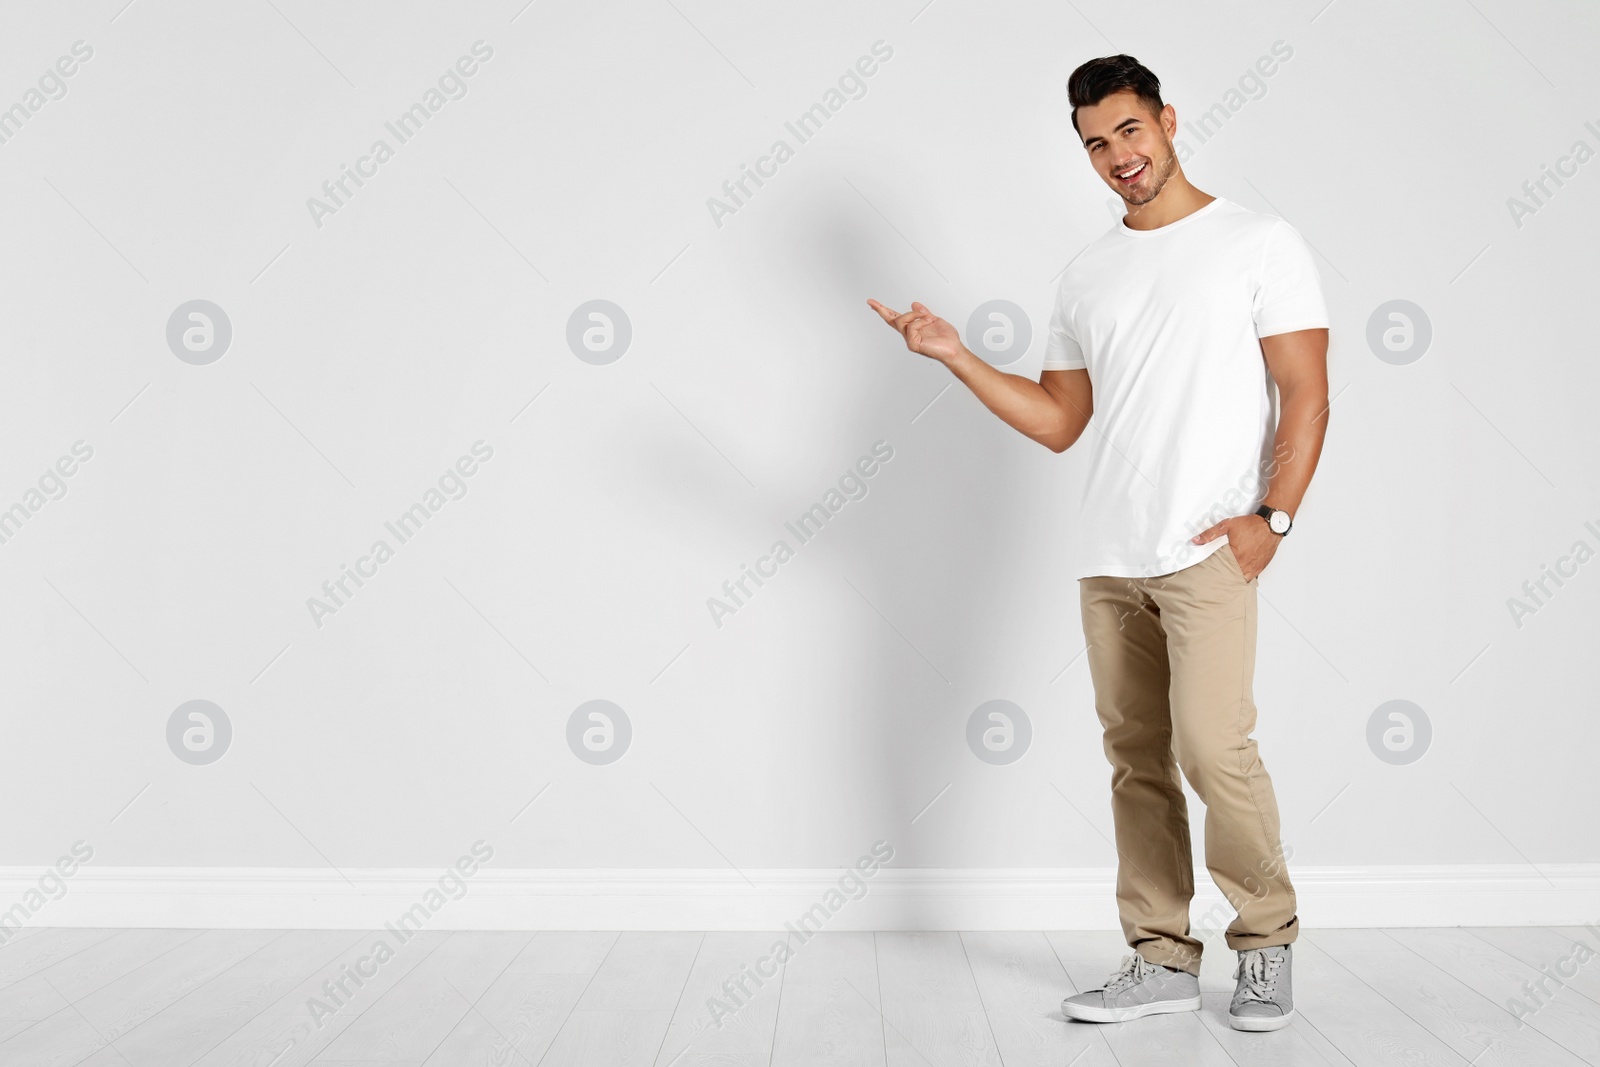 Photo of Full length portrait of handsome young man and space for text on white wall background